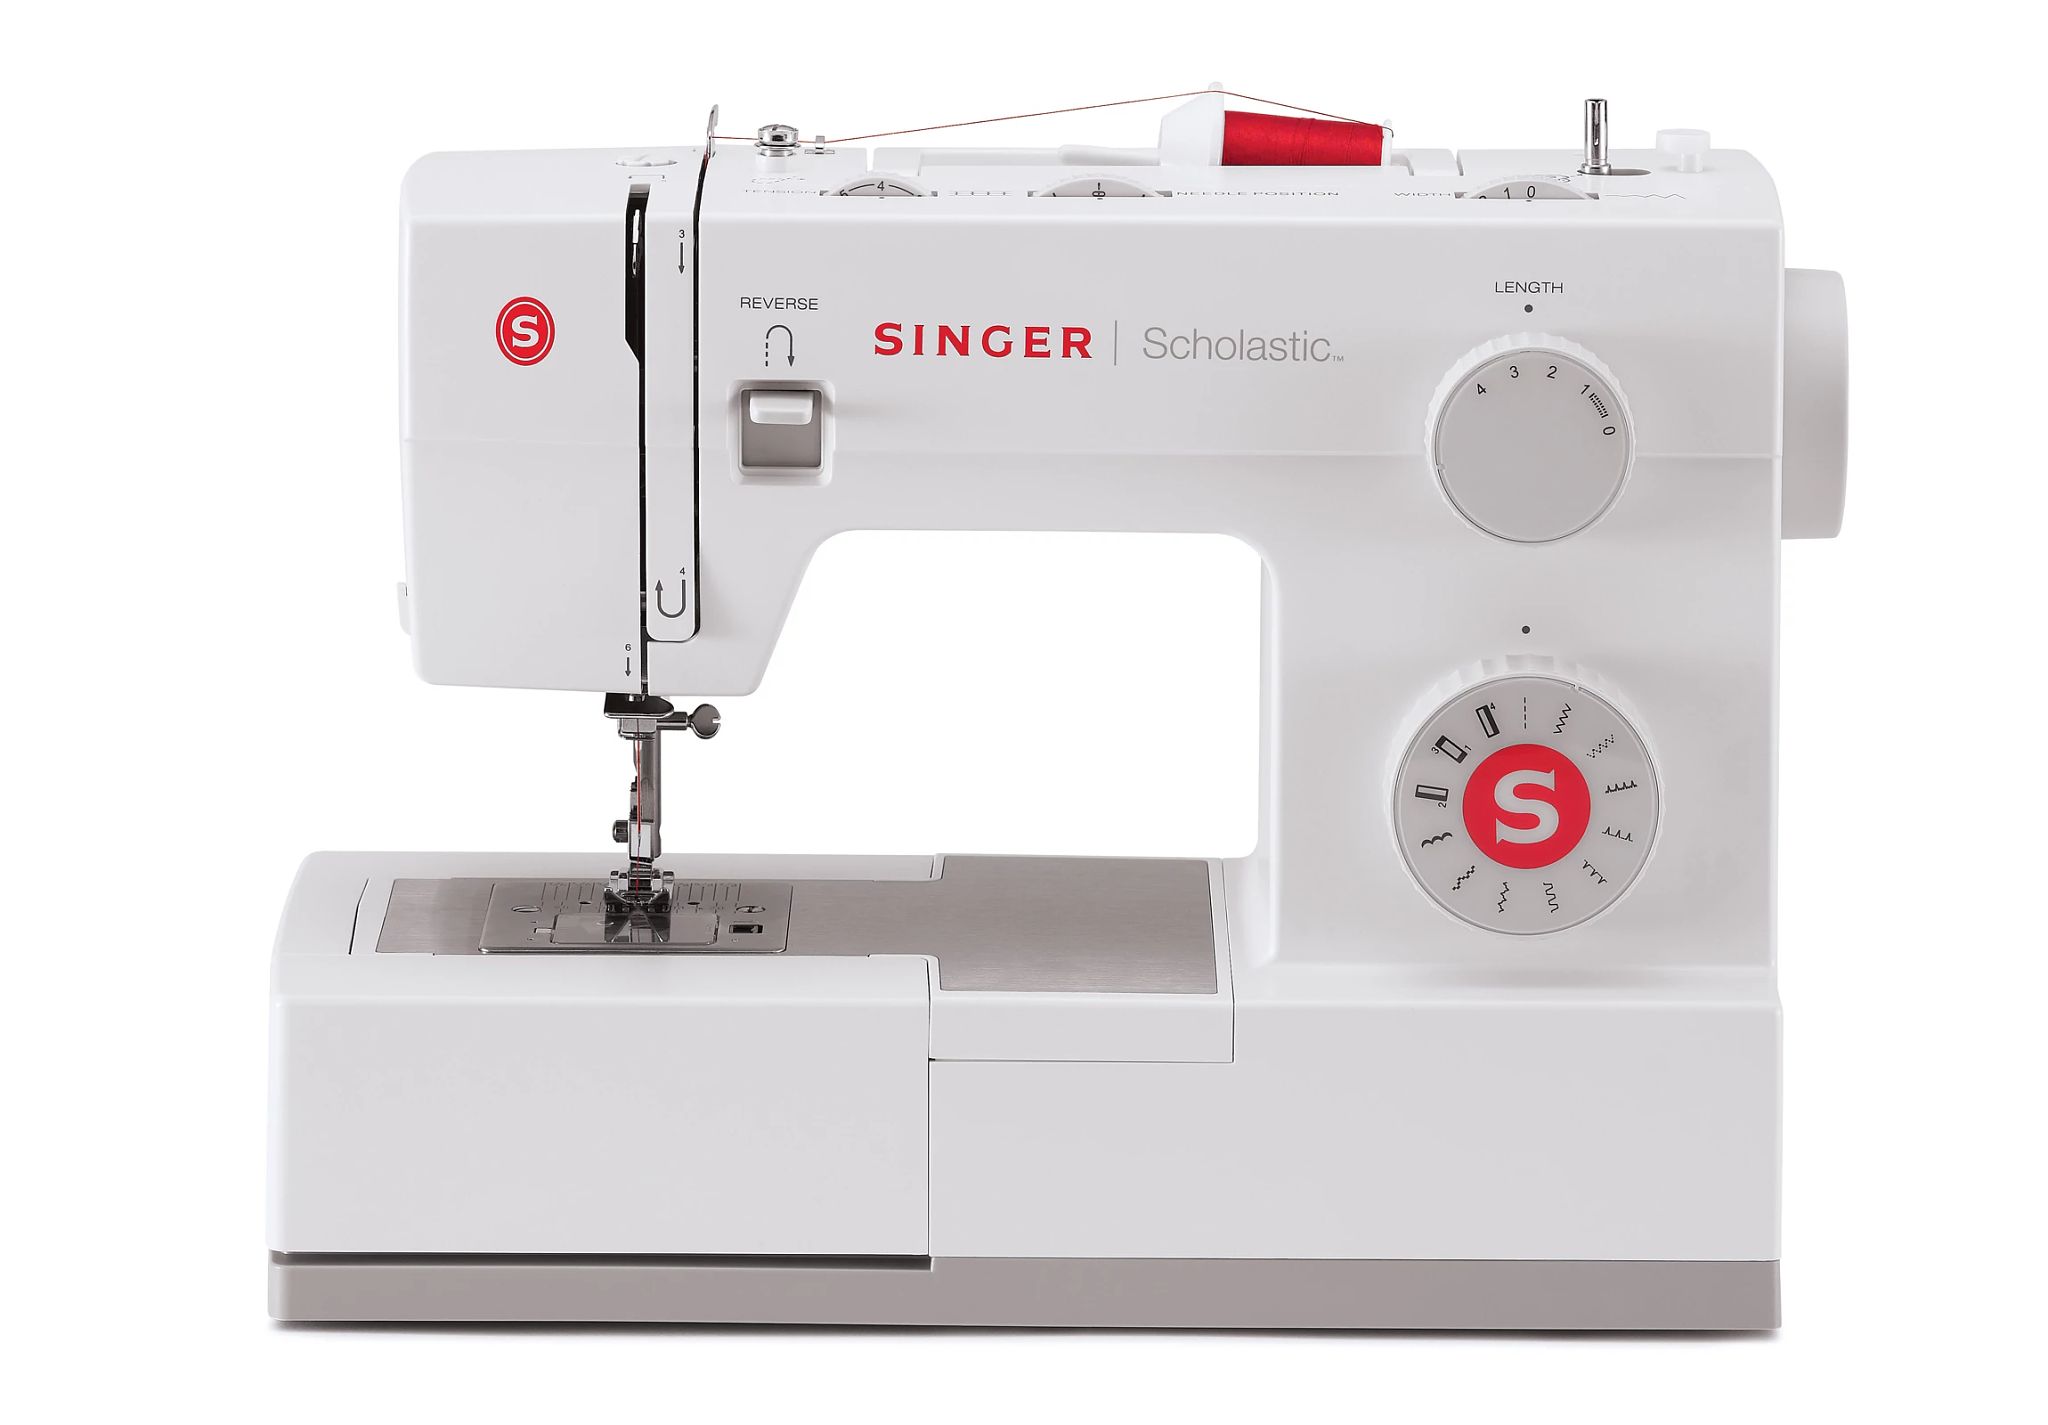 Singer | Heavy Duty 4411 Sewing Machine with 11 Built-In Stitches, Metal Frame and Stainless Steel Bedplate, Great for Sewing All Fabrics